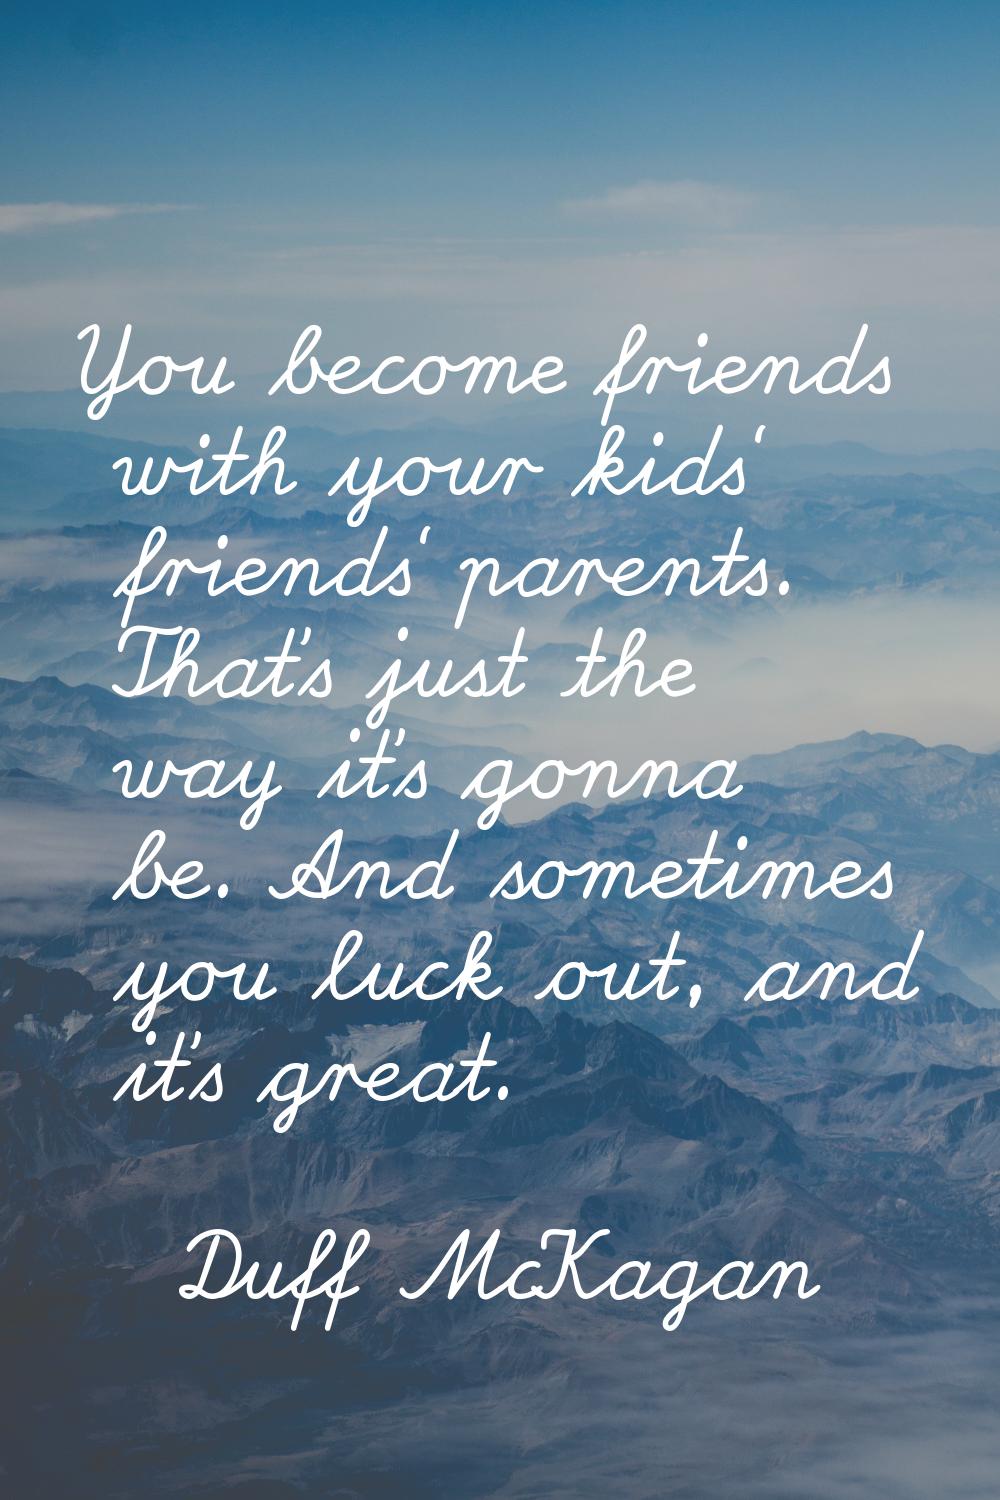 You become friends with your kids' friends' parents. That's just the way it's gonna be. And sometim